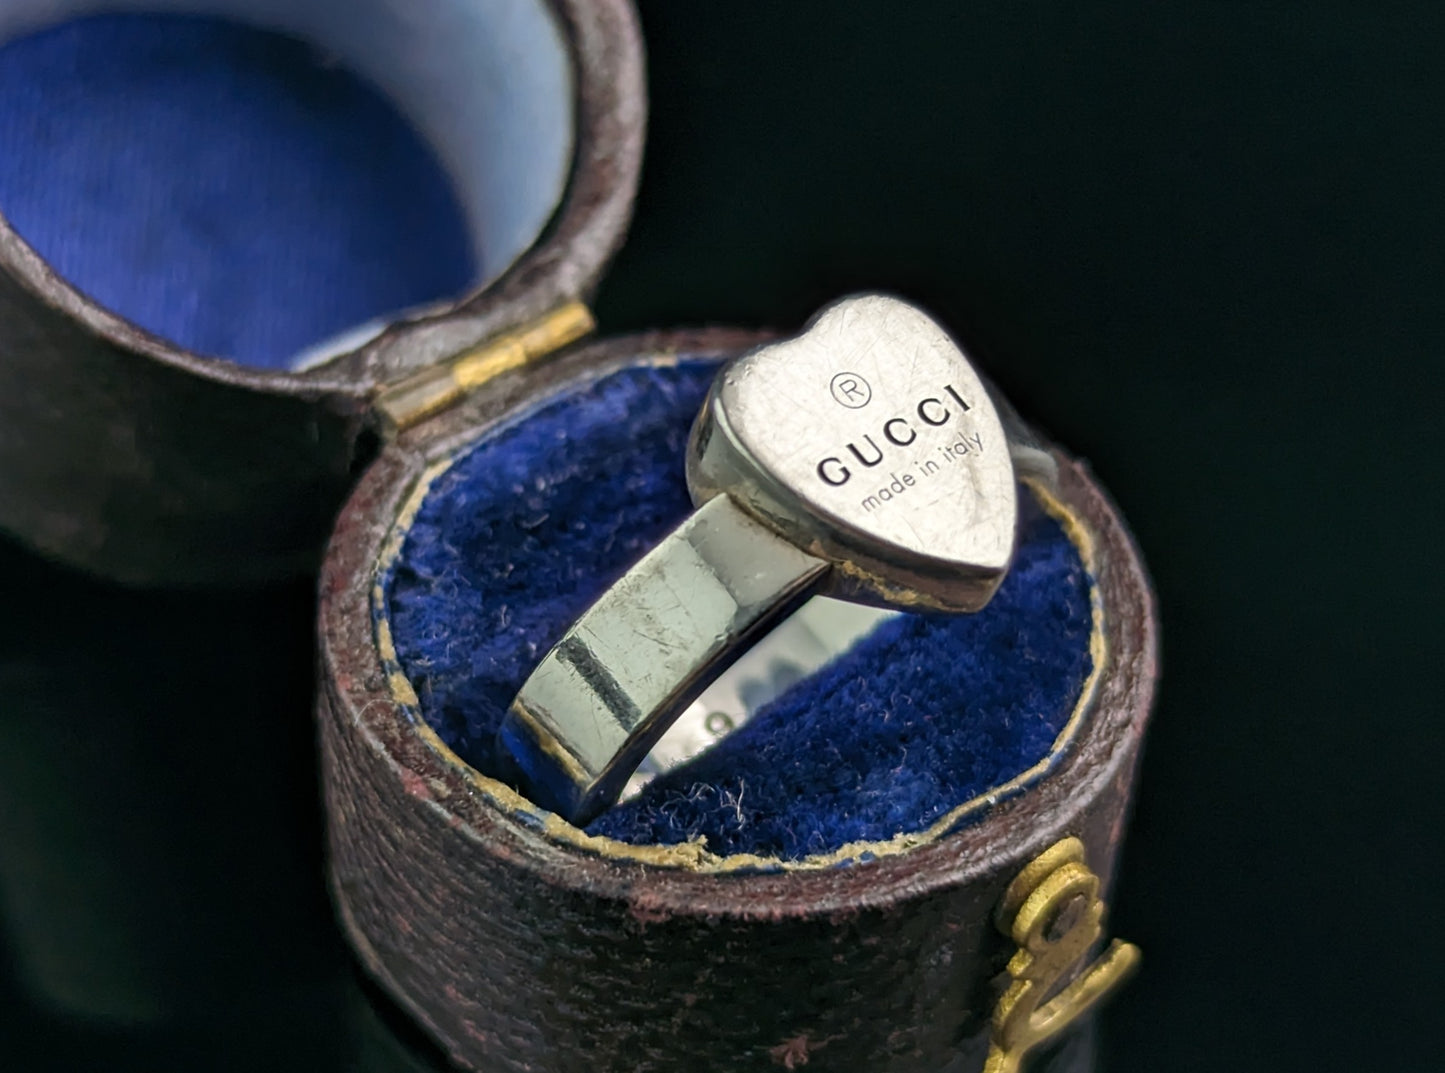 Gucci sterling silver heart trademark ring, boxed